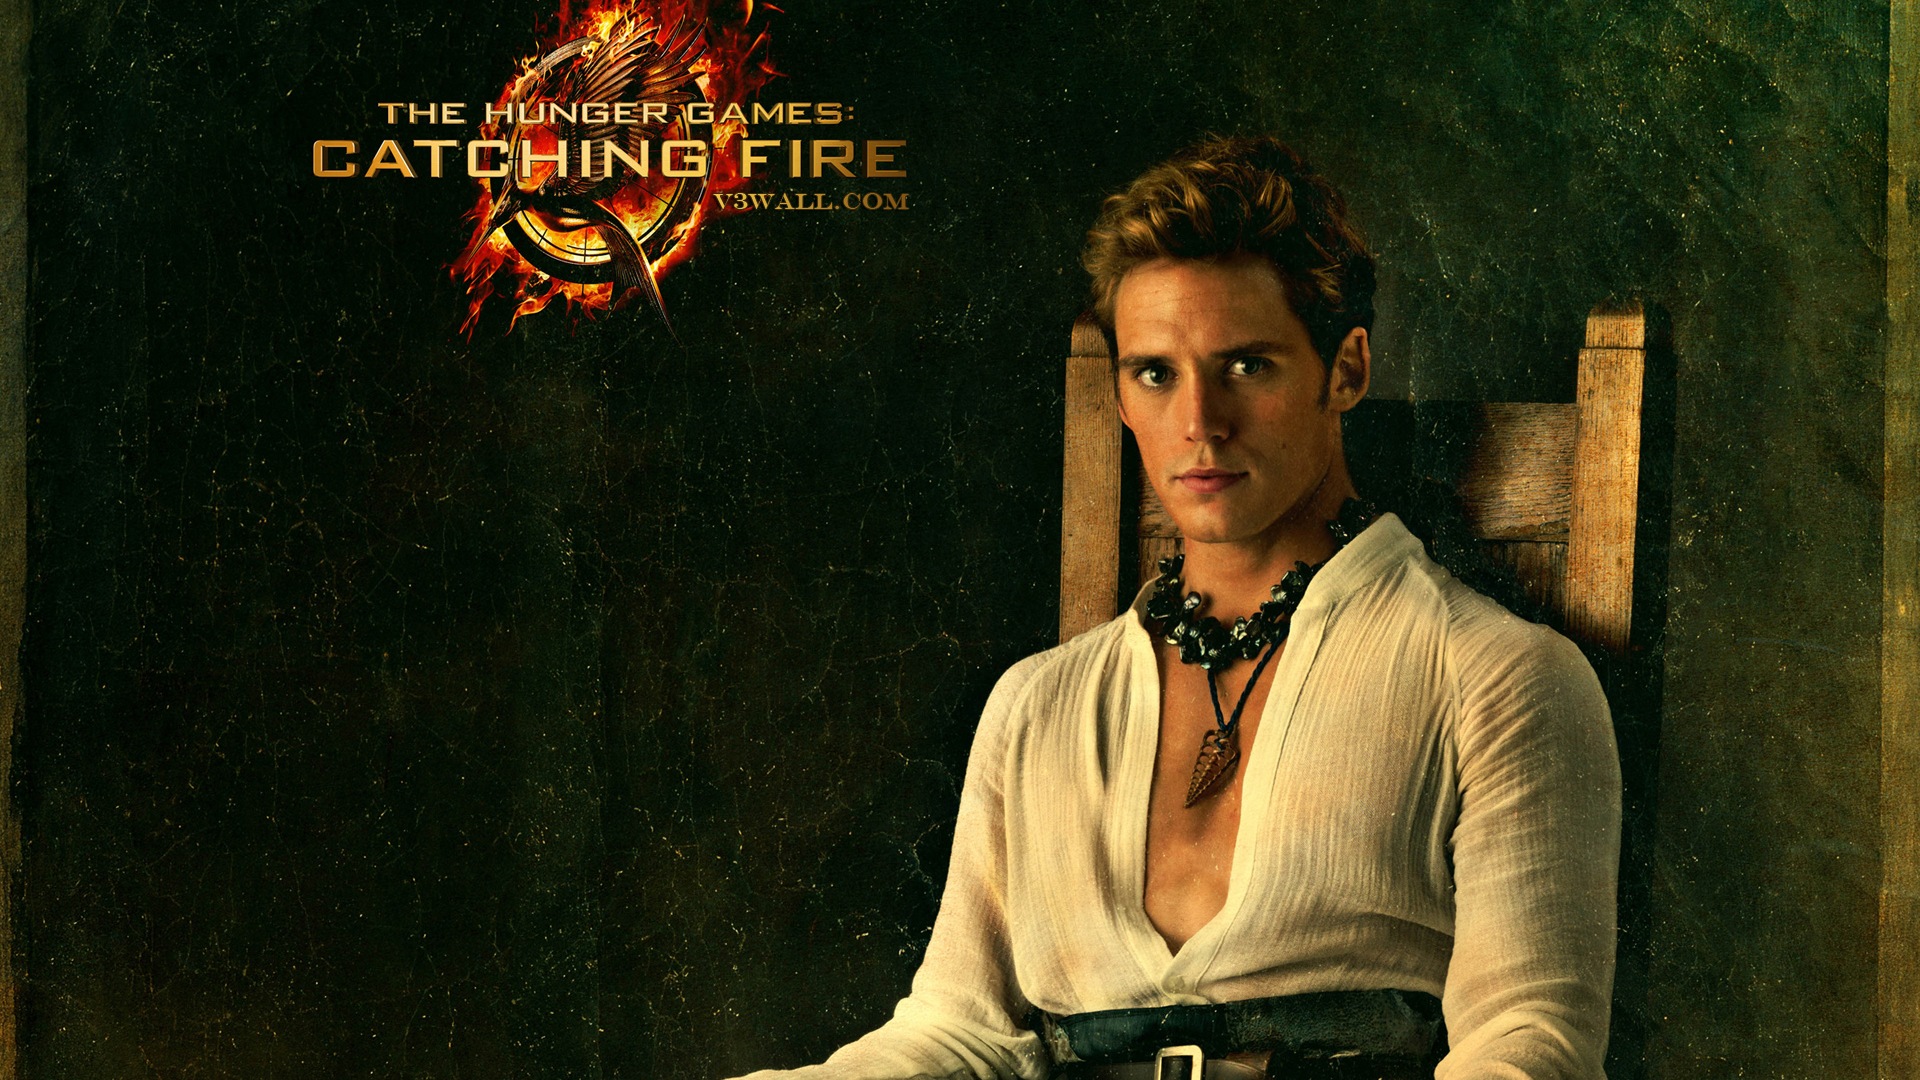 The Hunger Games: Catching Fire wallpapers HD #10 - 1920x1080